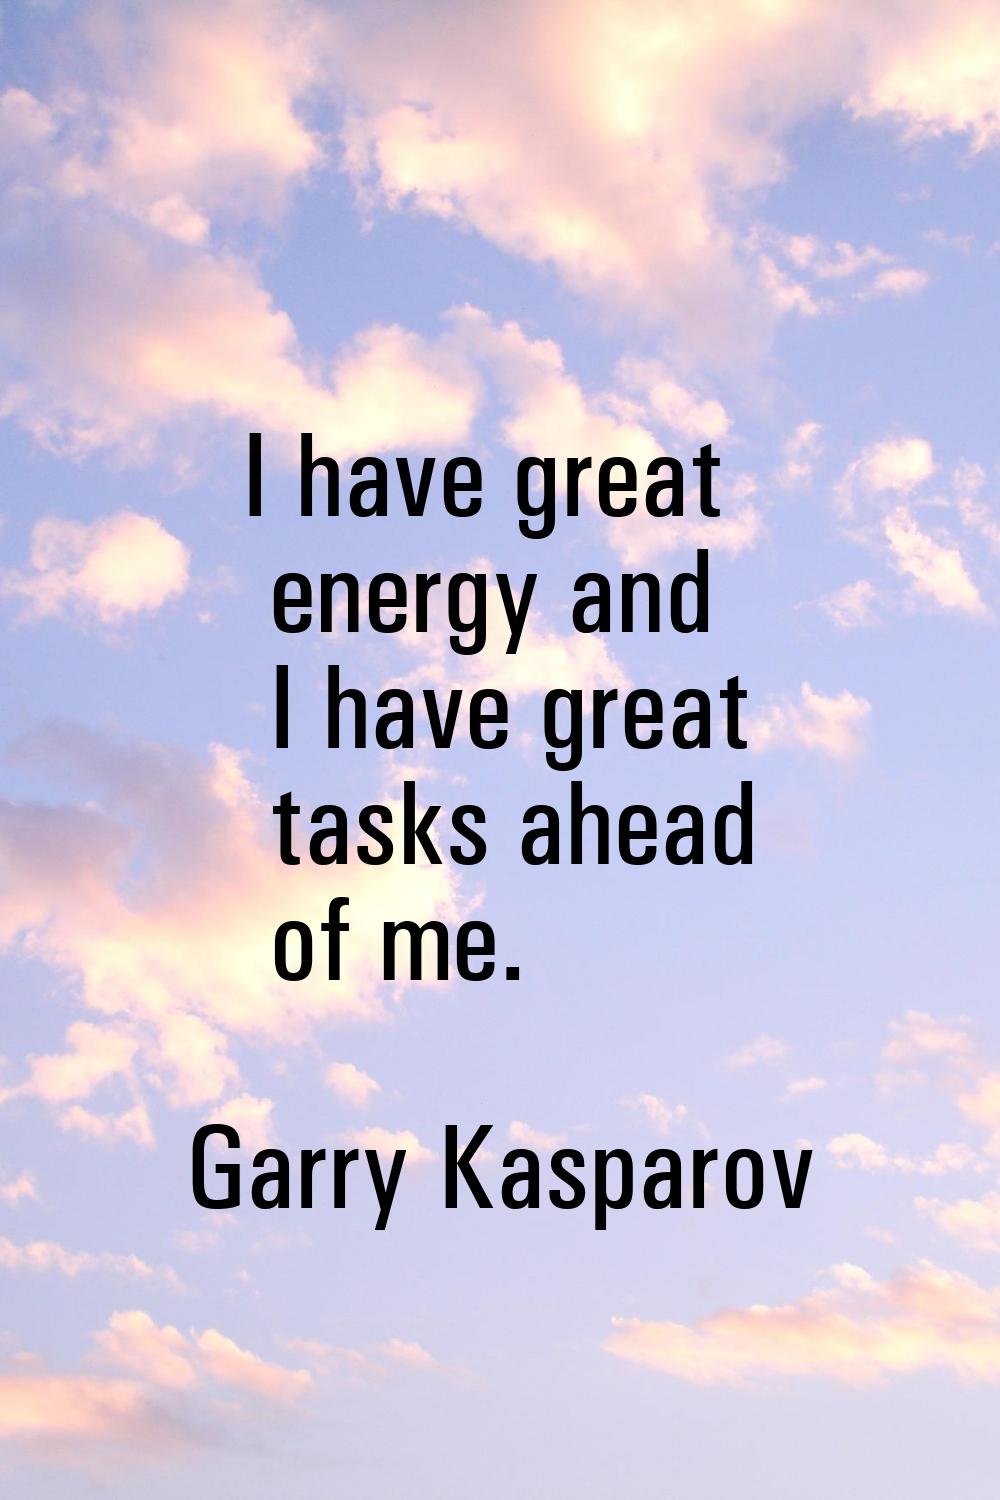 I have great energy and I have great tasks ahead of me.